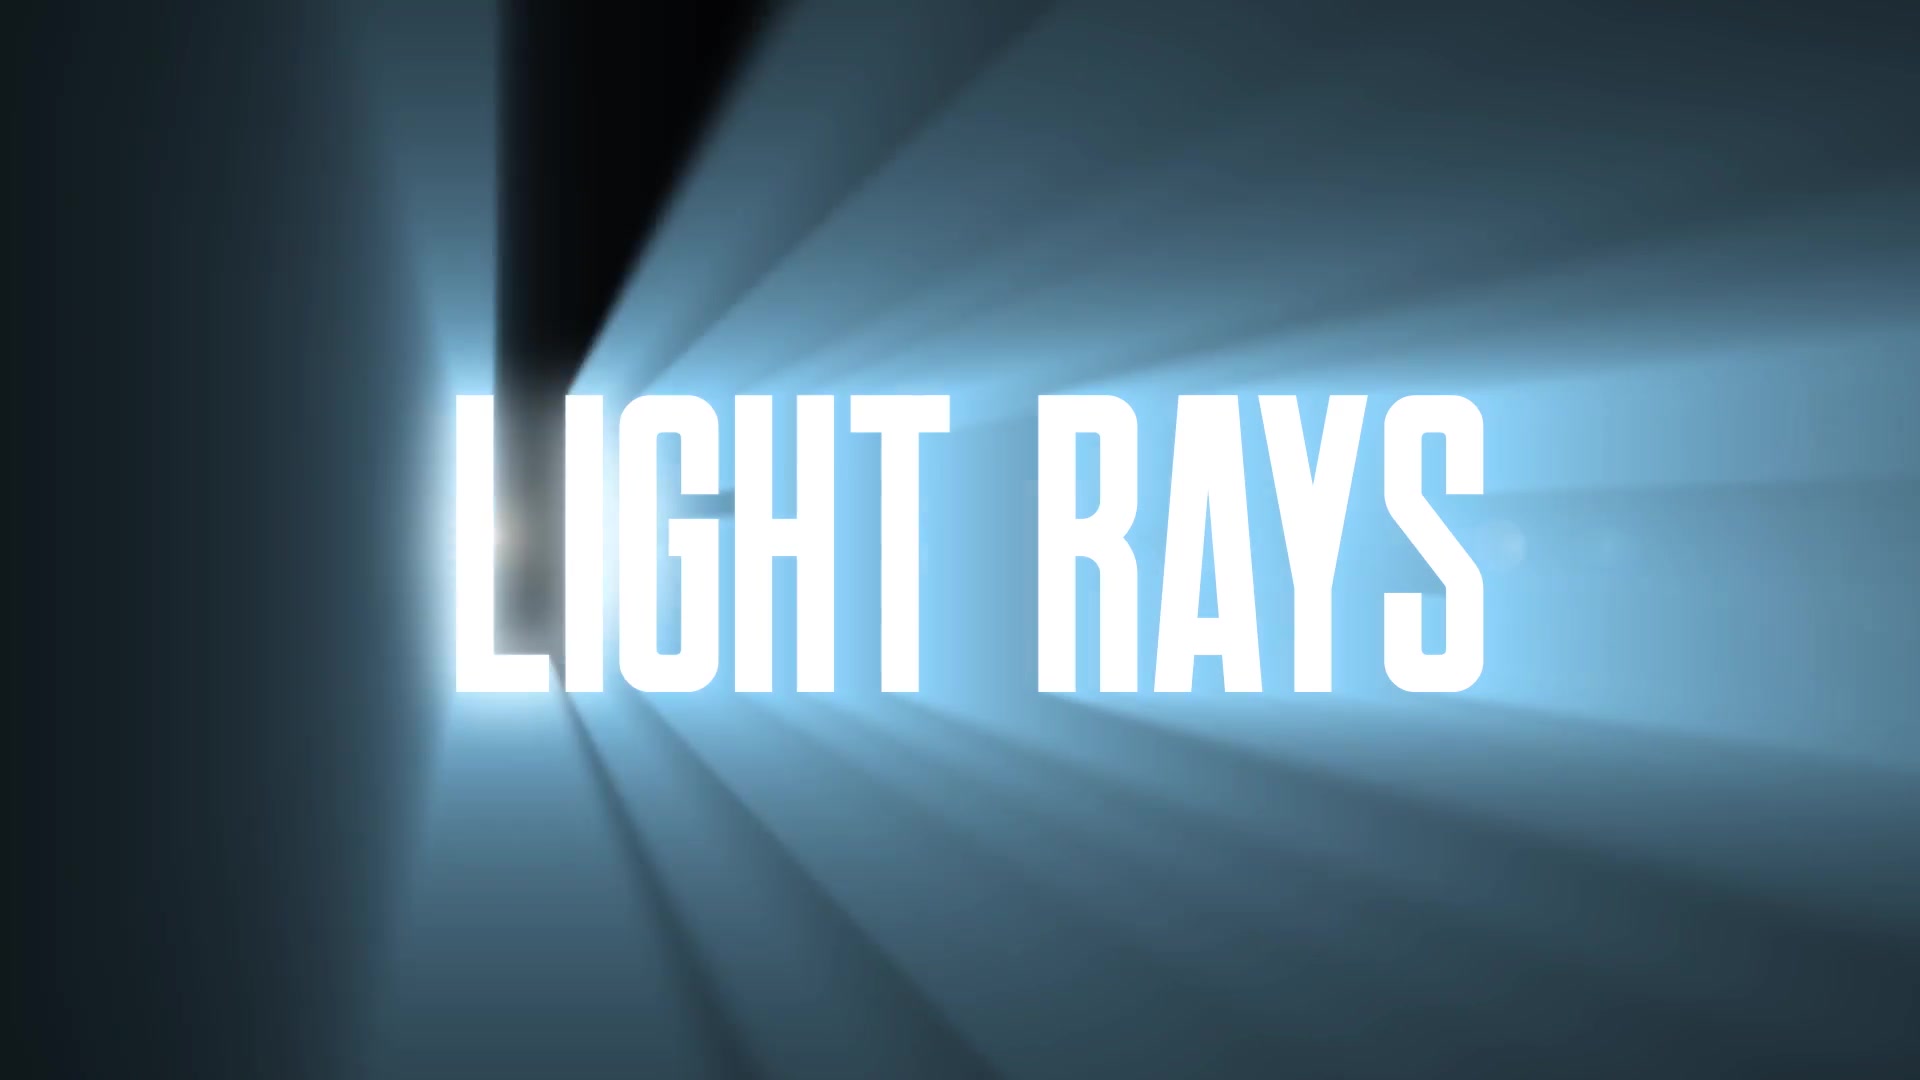 cc light rays after effects download